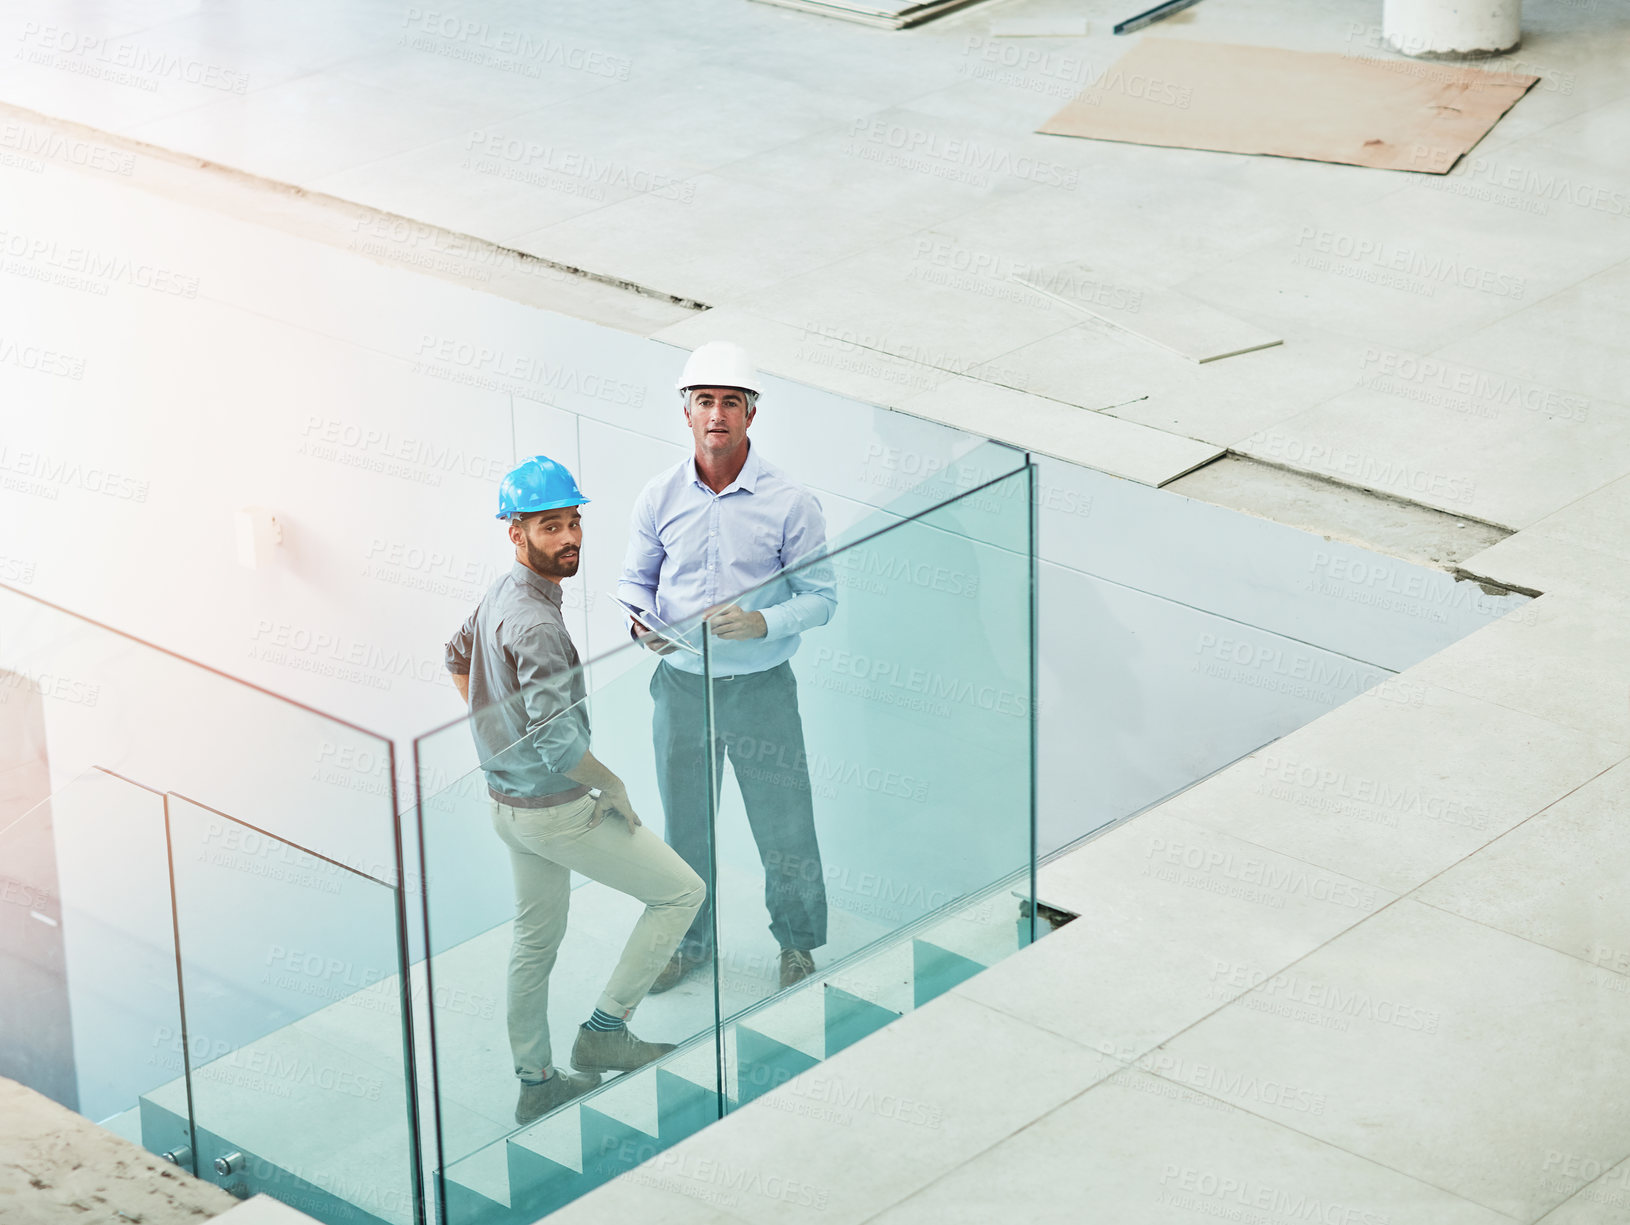 Buy stock photo Shot of two architects doing an inspection of their site while wearing hardhats